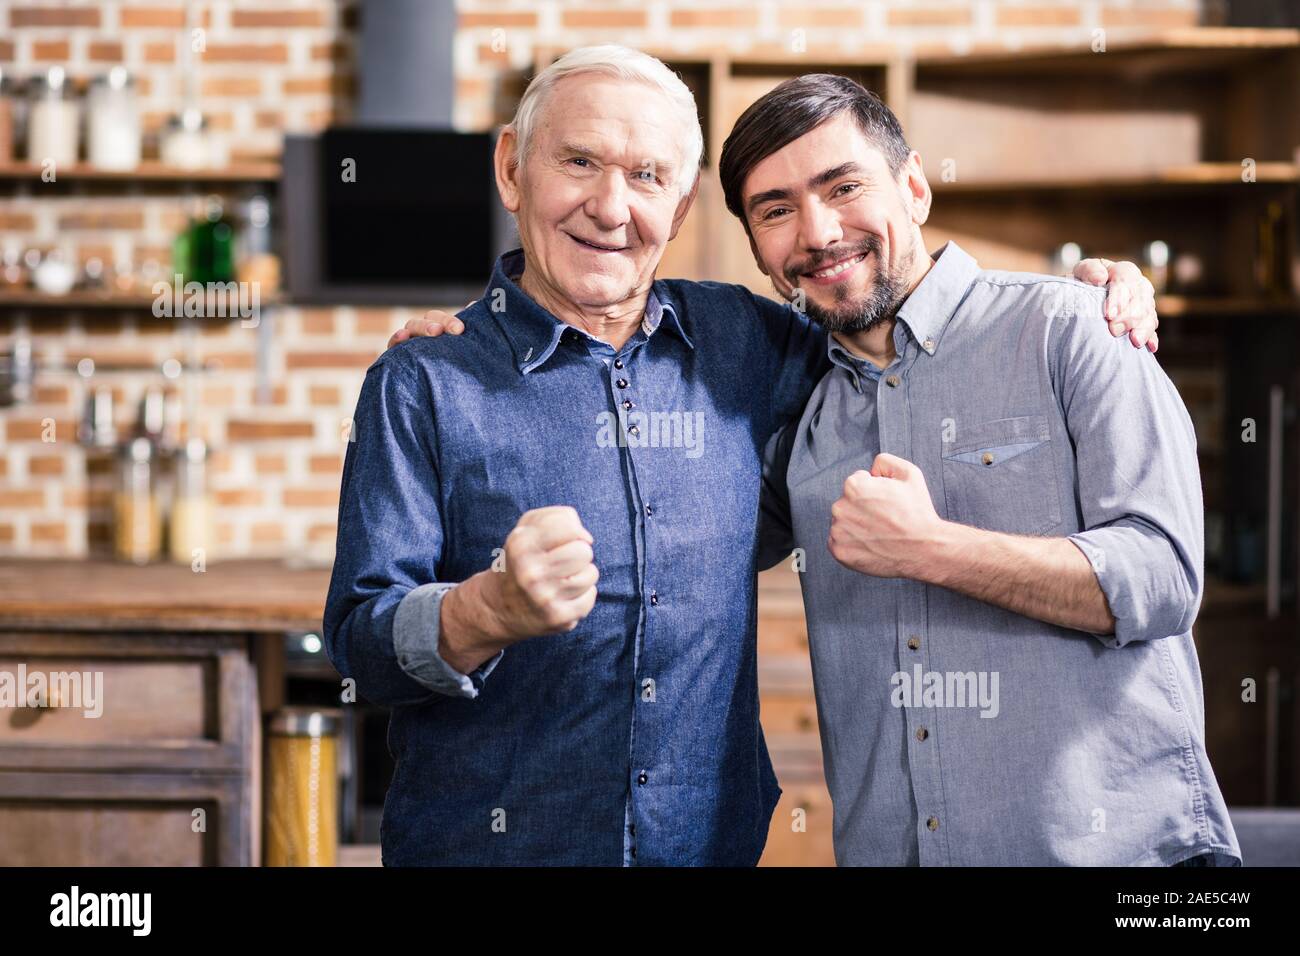 Positive elderly man embracing with his son Stock Photo